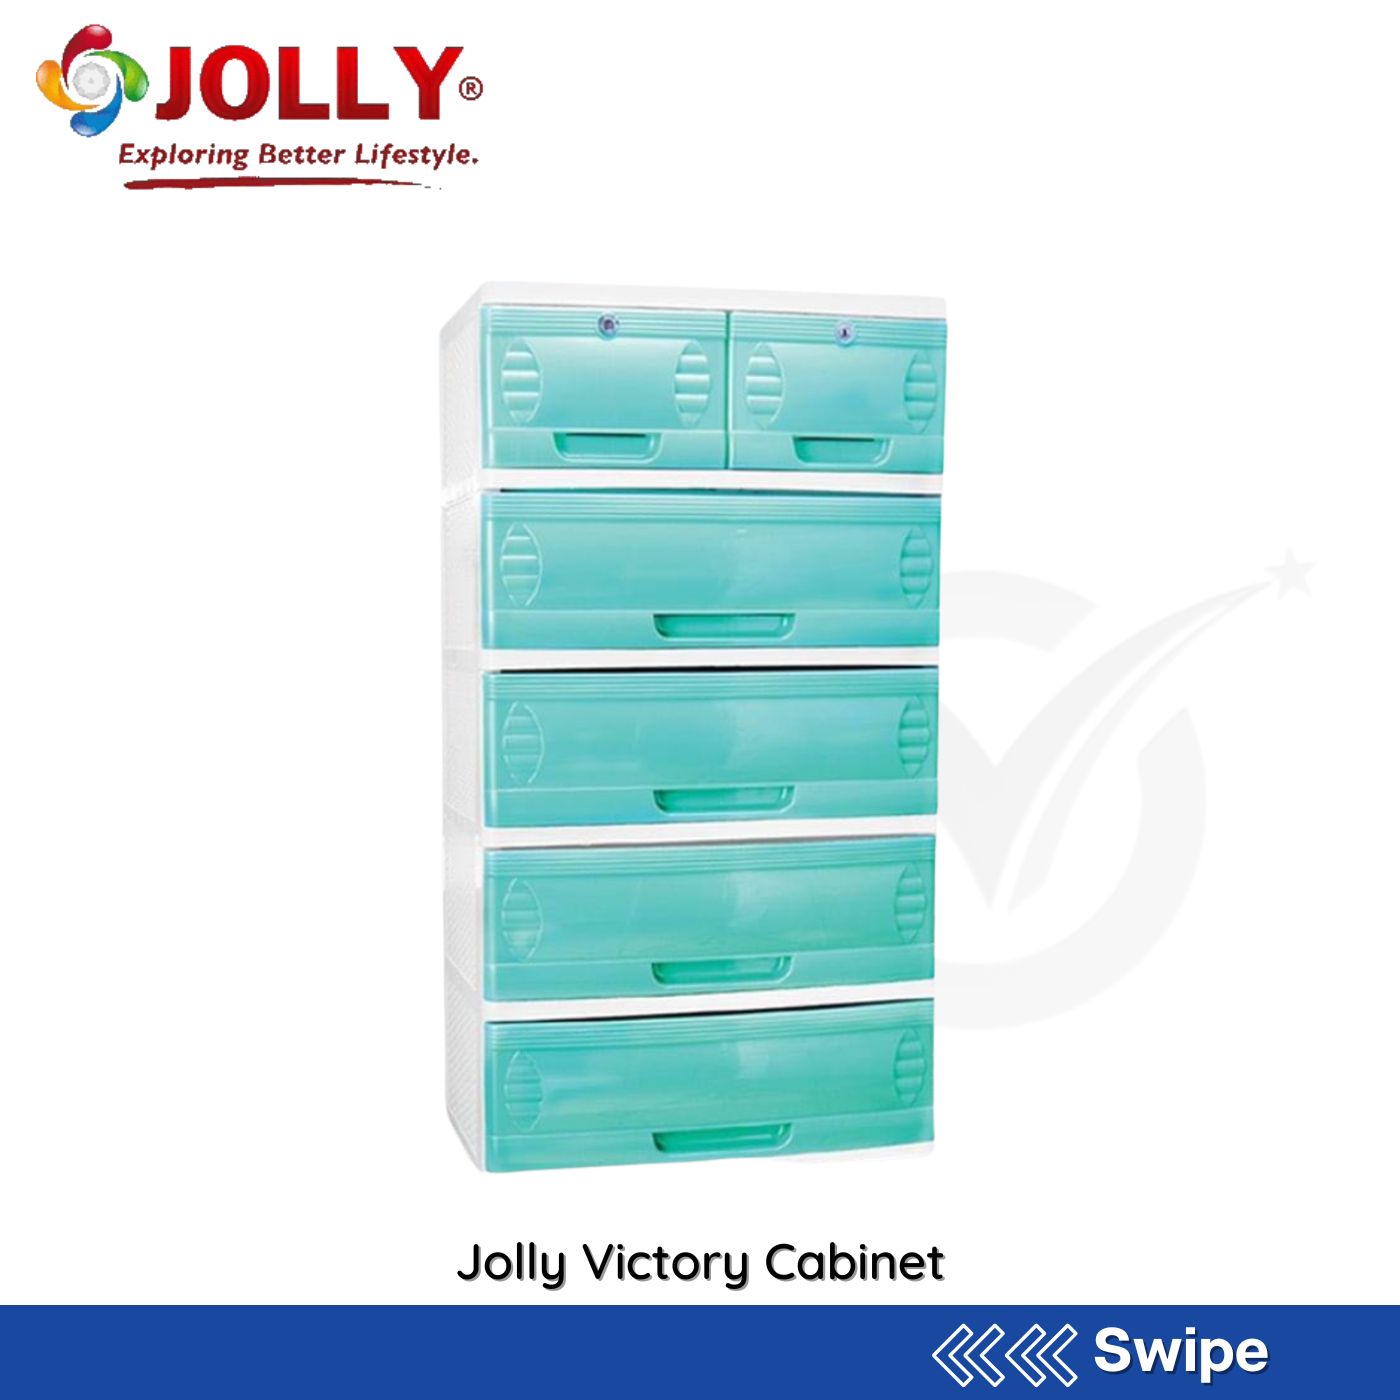 Jolly Victory Cabinet